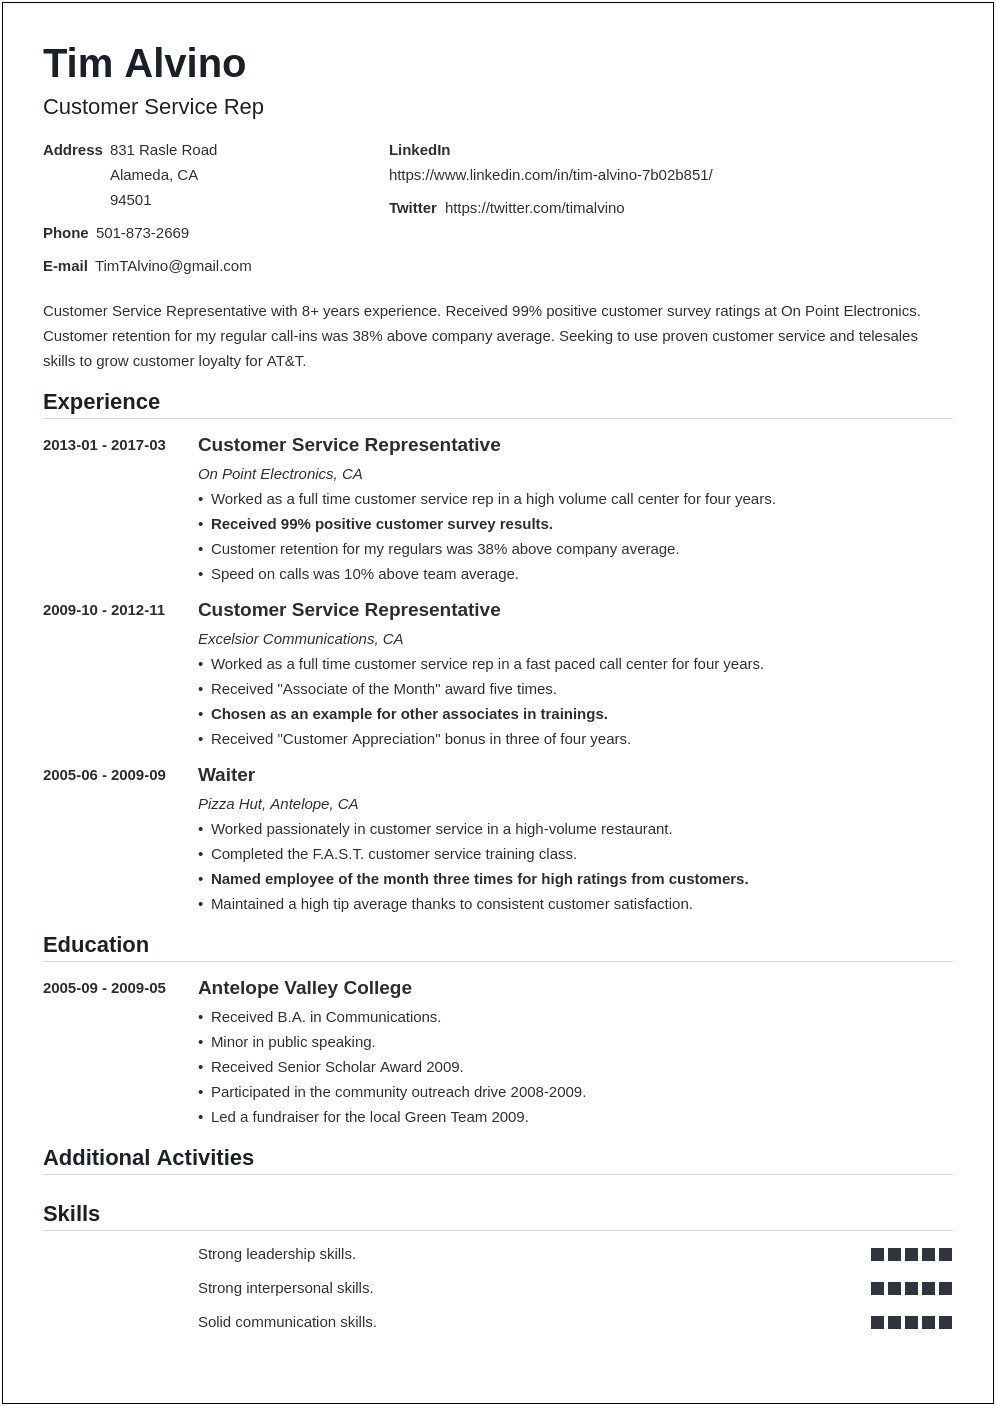 Resume Objective For Customer Service Cashier